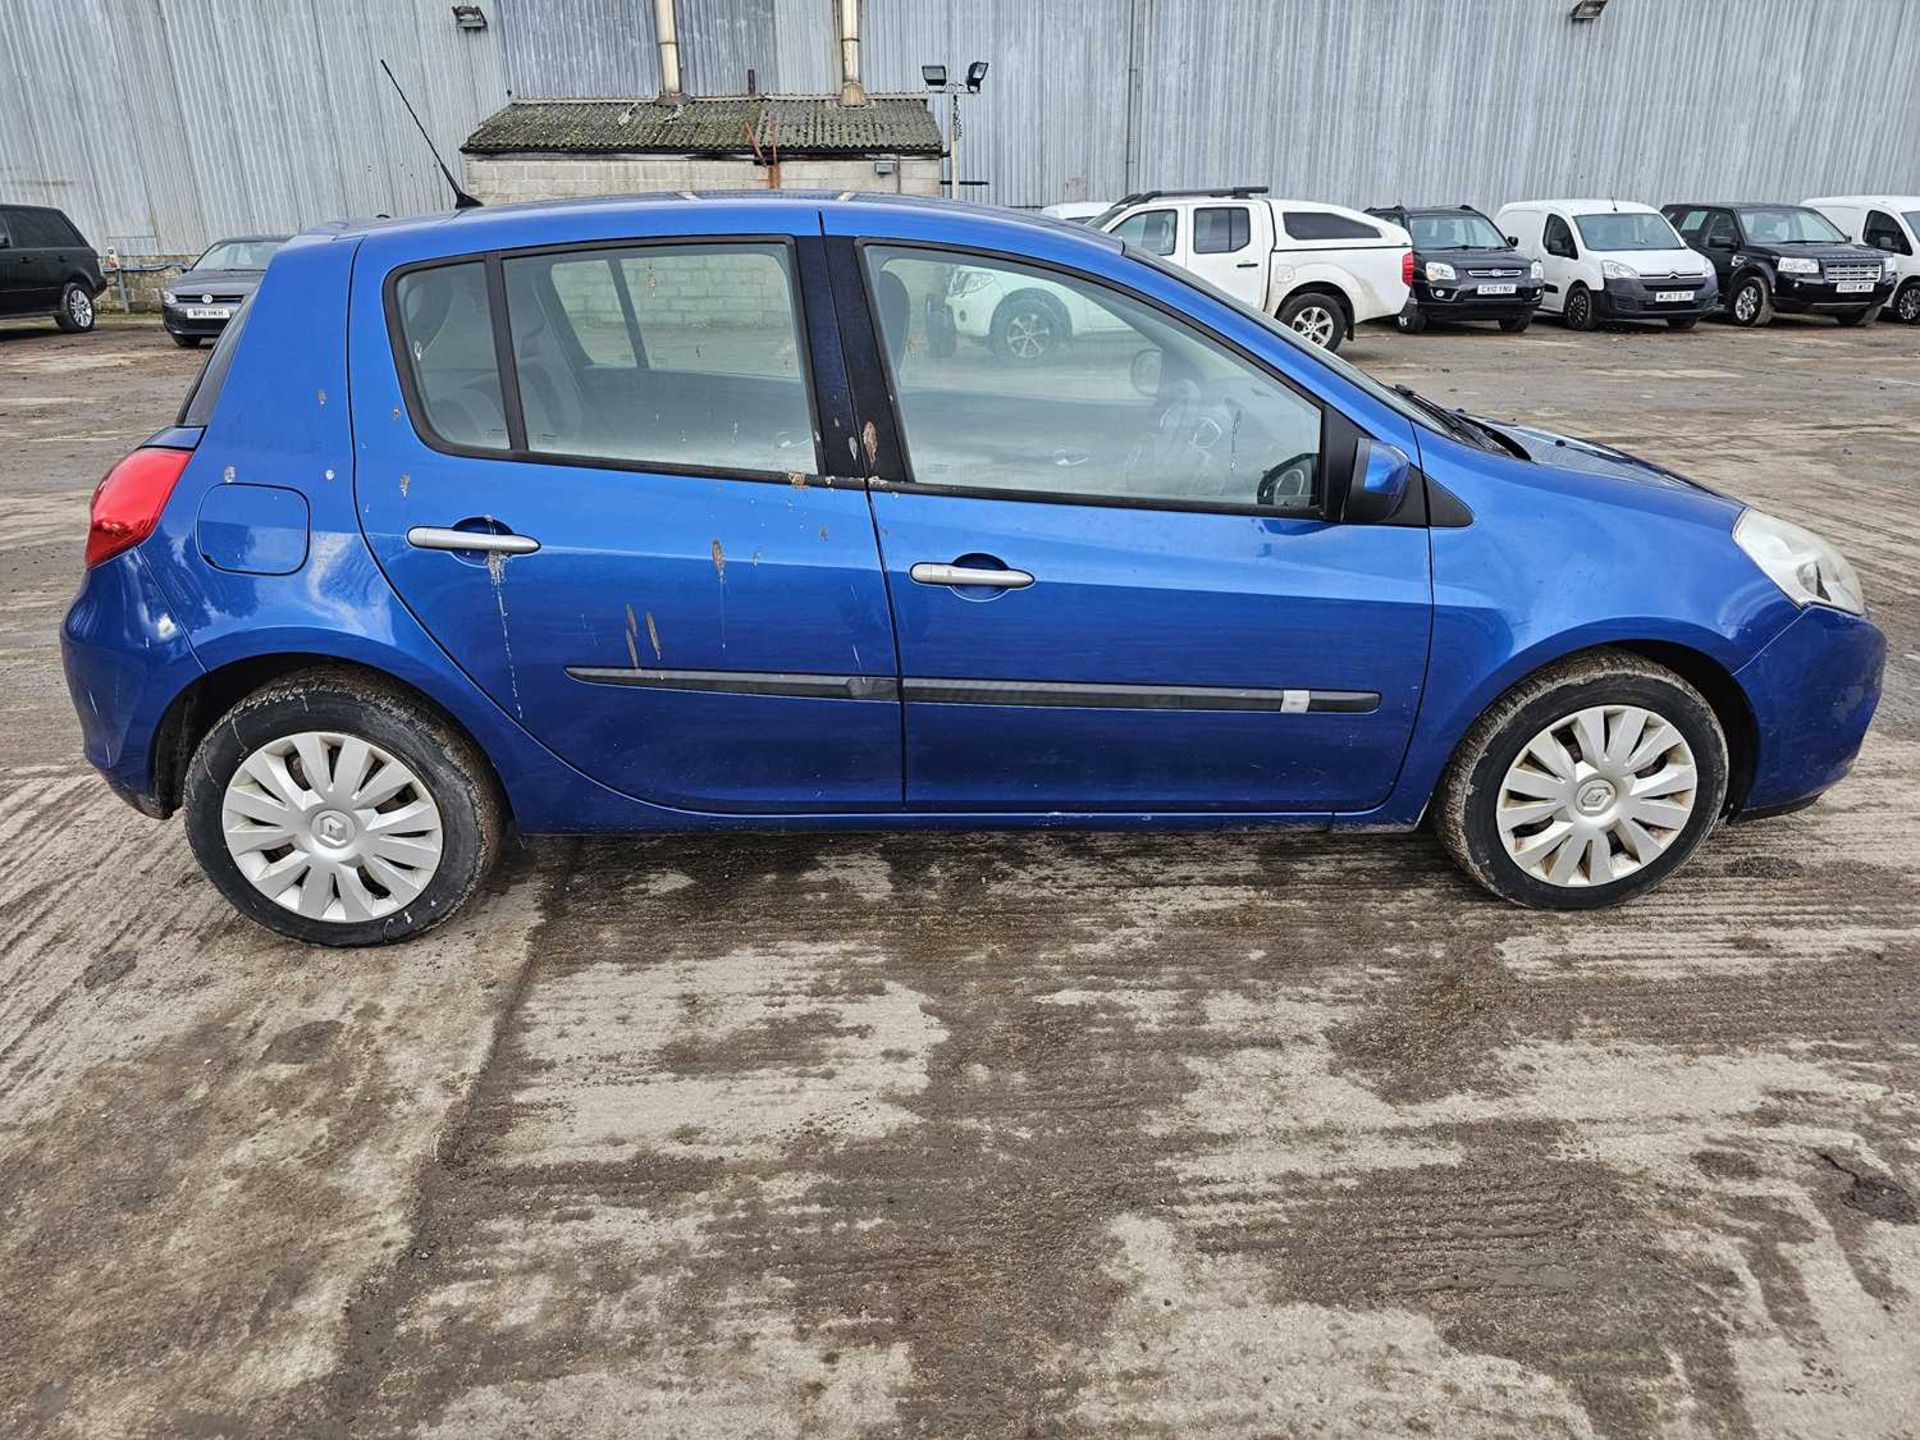 2010 Renault Clio Auto, A/C (Reg. Docs. Available, Tested 01/25) - Image 2 of 28